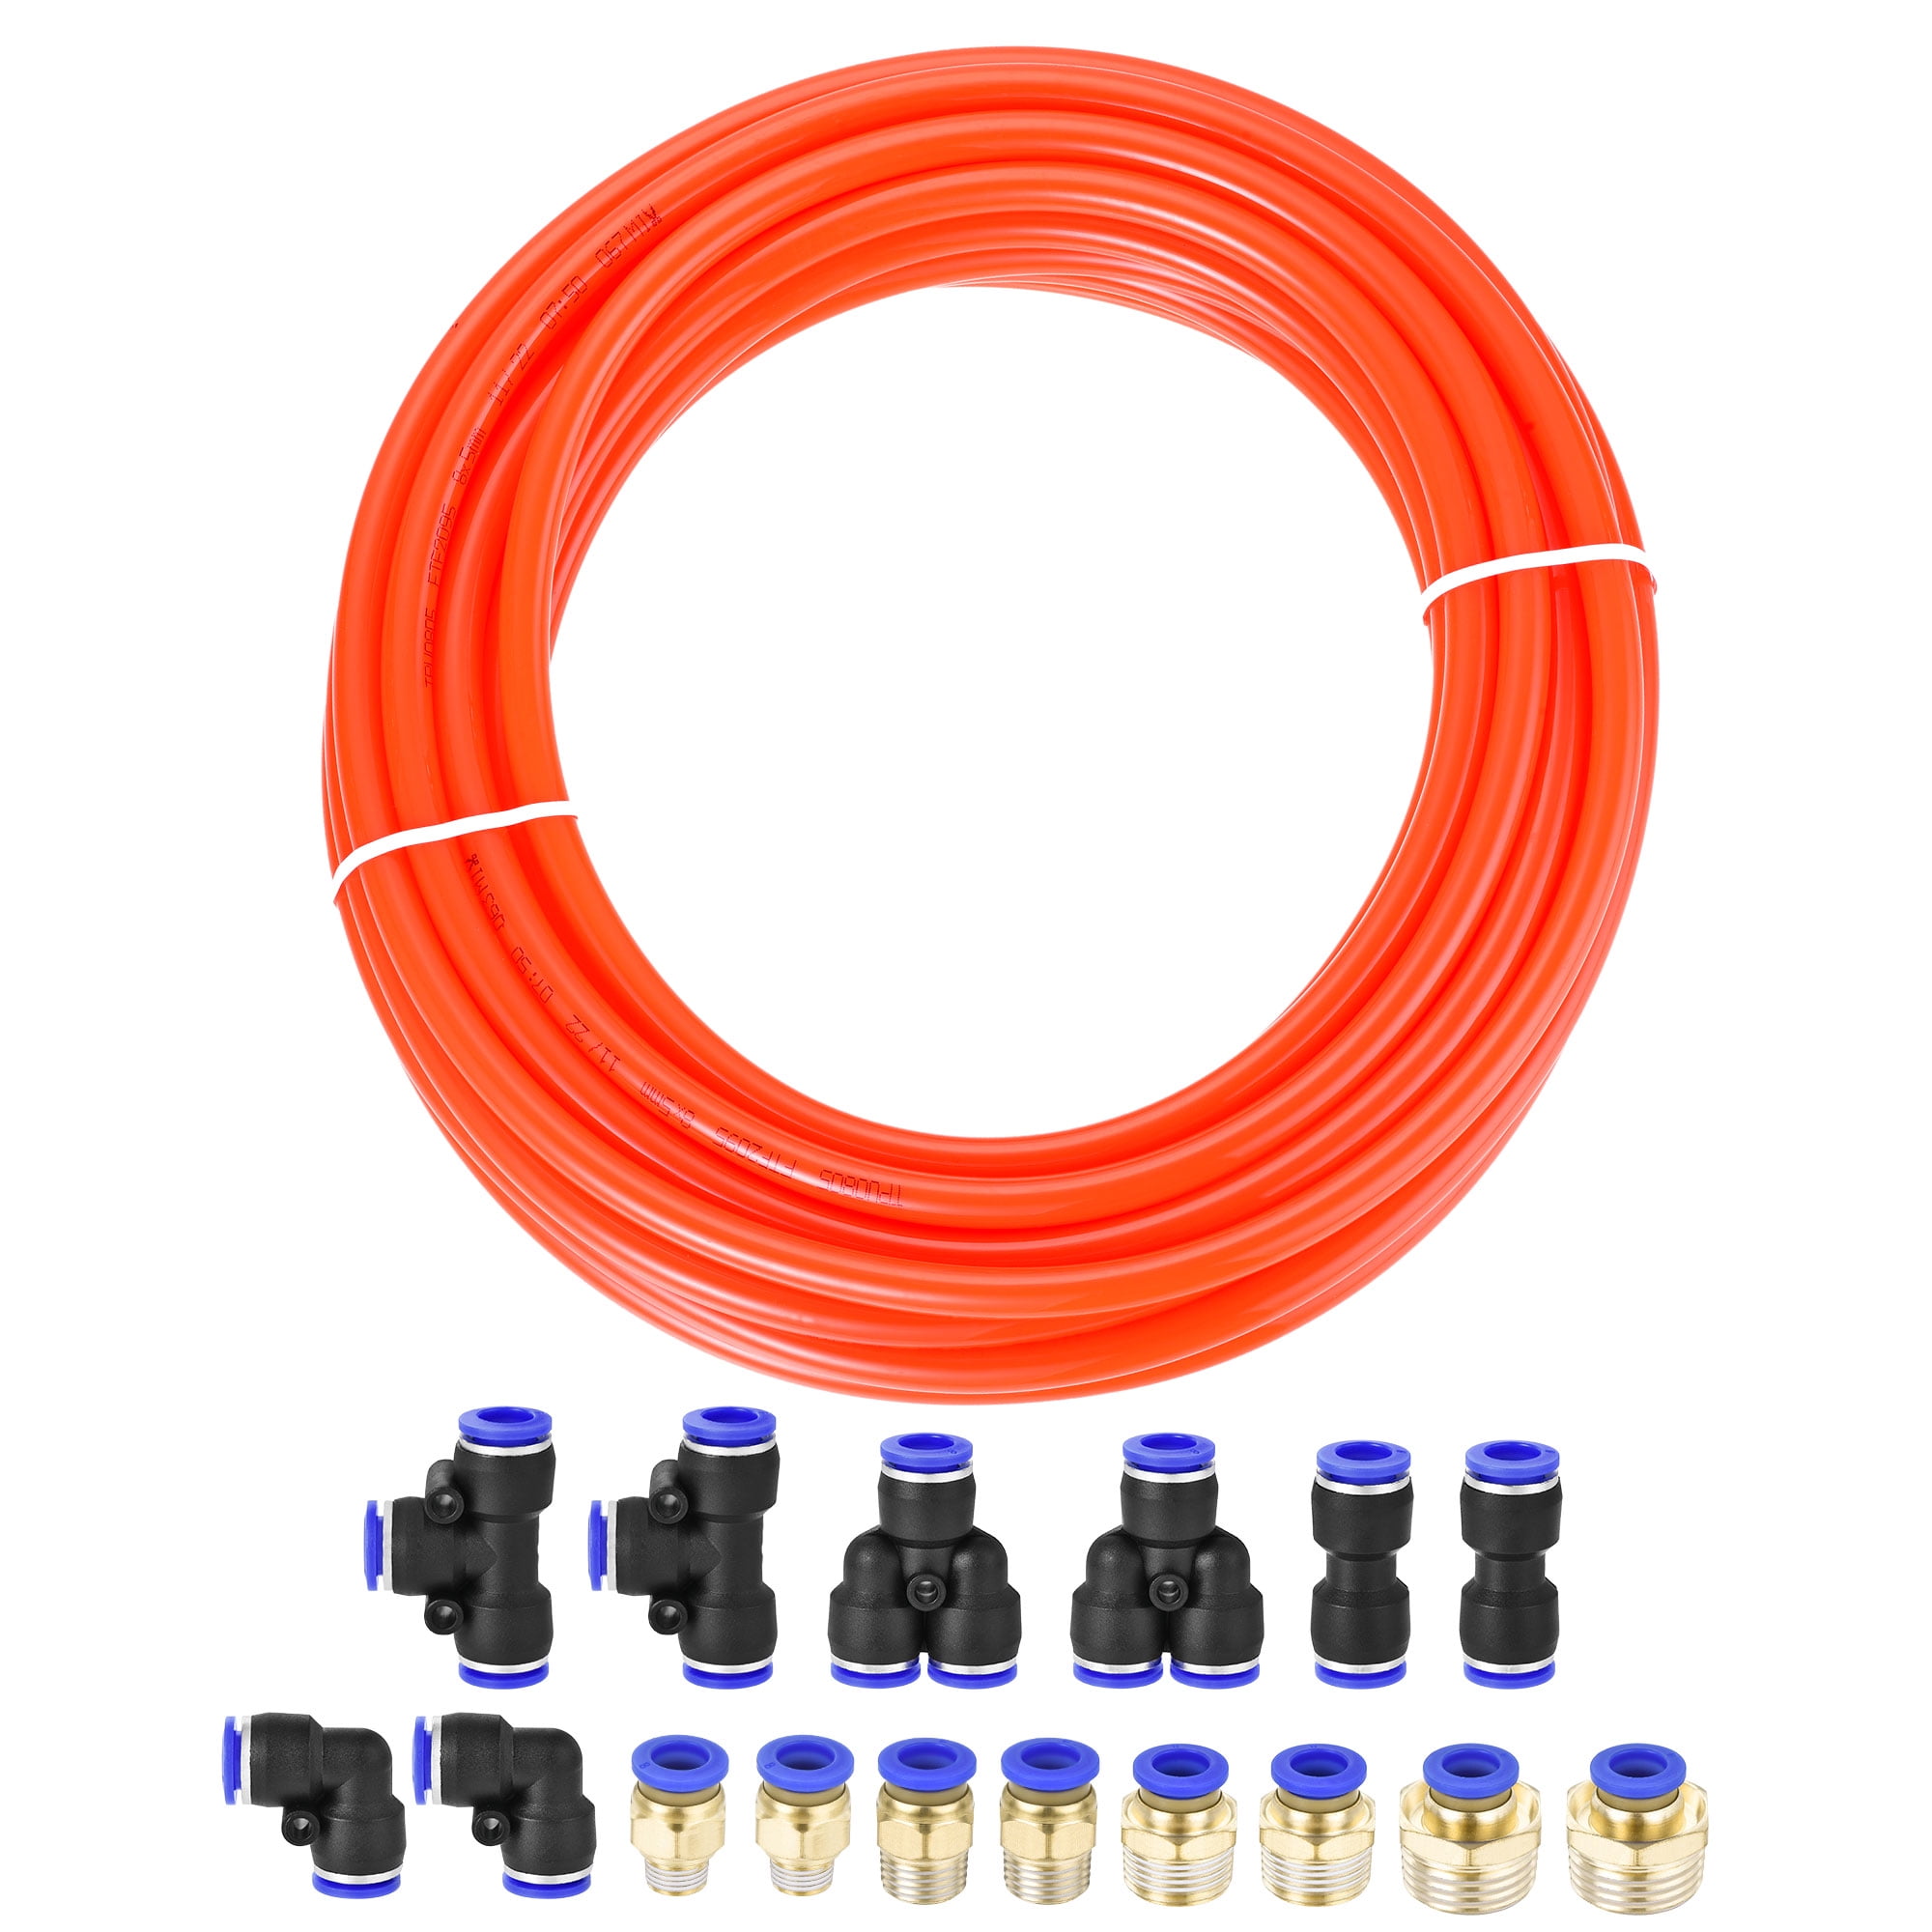 uxcell Pneumatic 8mm OD Polyurethane PU Air Hose Tubing Kit 10 Meters Blue with 16 Pcs Push to Connect Fittings